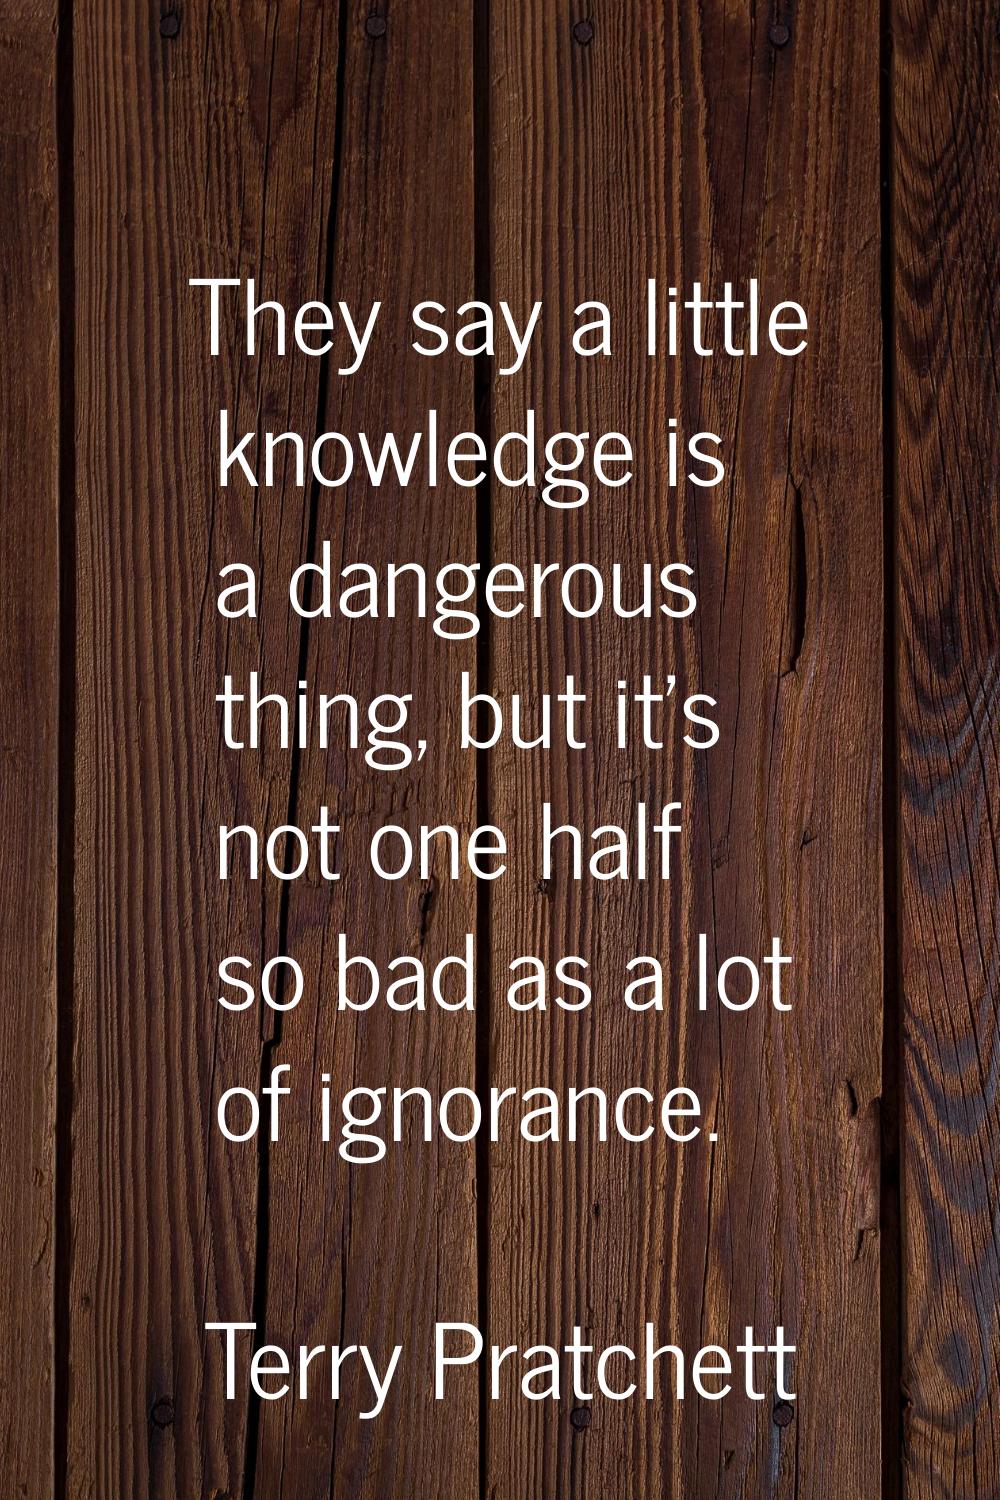 They say a little knowledge is a dangerous thing, but it's not one half so bad as a lot of ignoranc